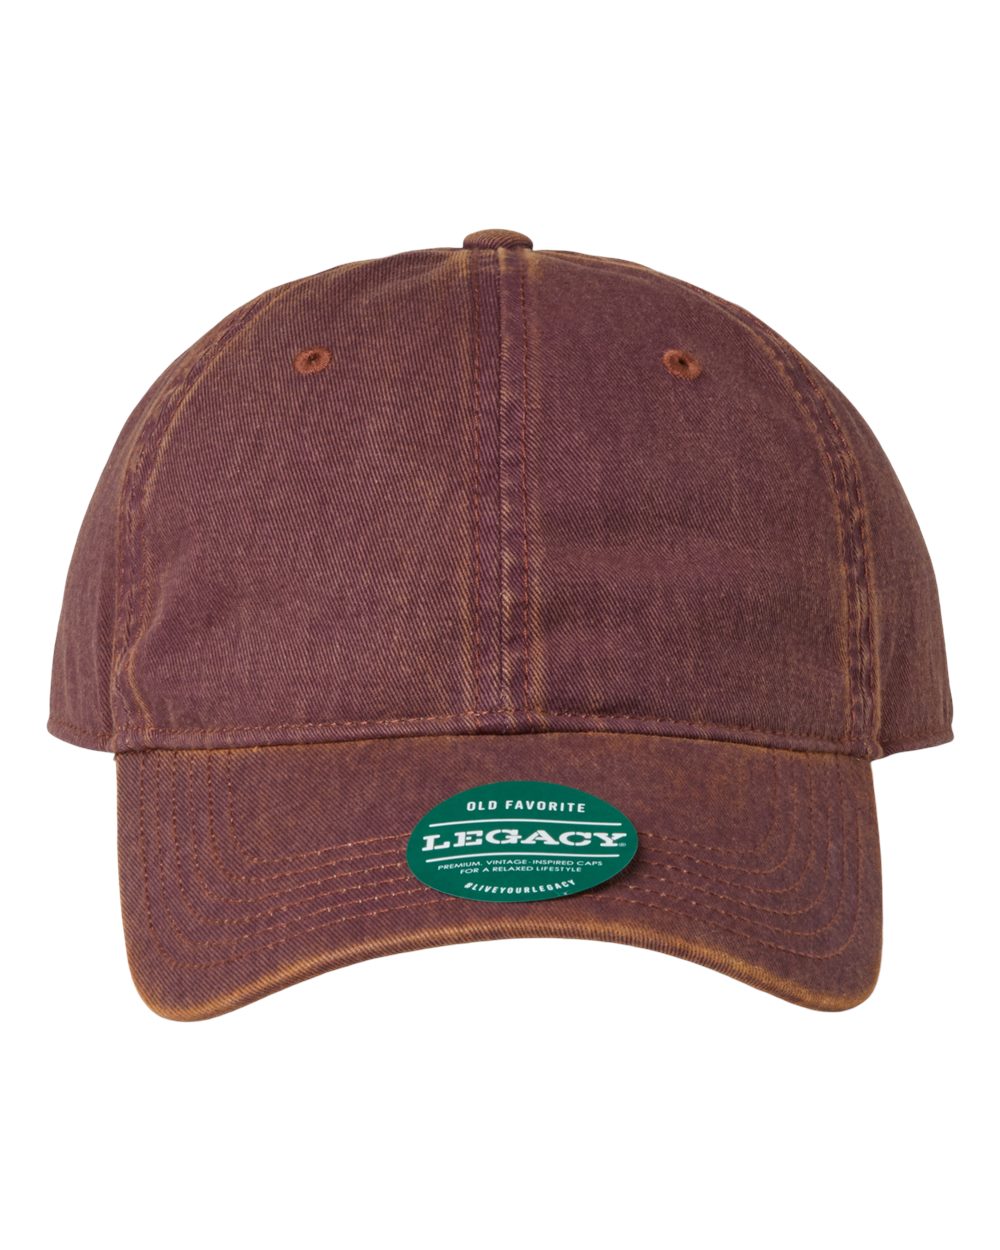 LEGACY - Old Favorite Solid Twill Cap - OFAST